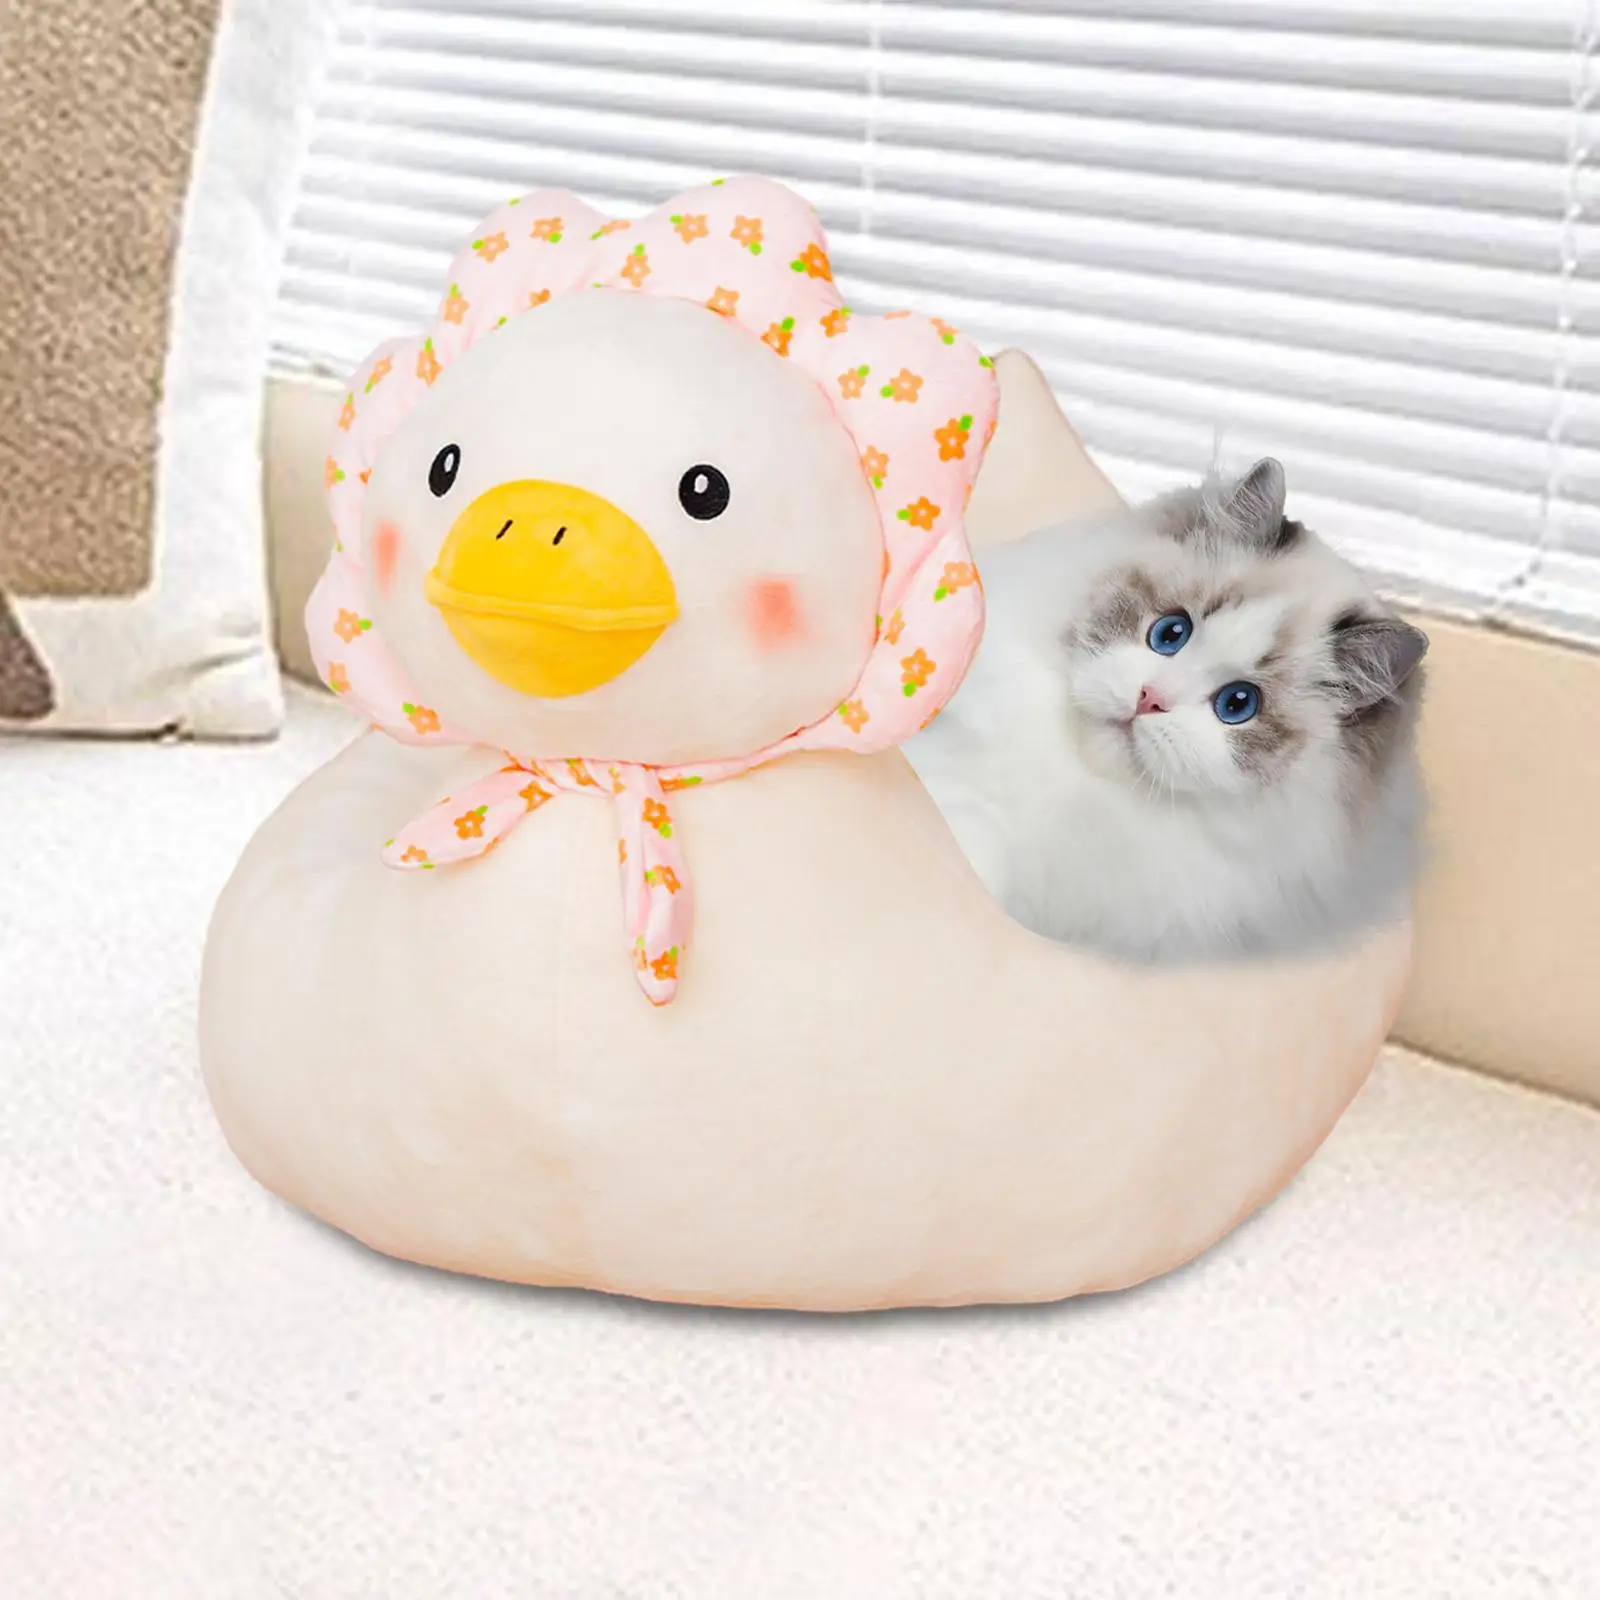 Dog Bed Non Slip Bottom Plush Pets Sofa Cushion Washable Cat Nesting House for Rabbits Kitty Guinea Pigs Puppy Hedgehogs